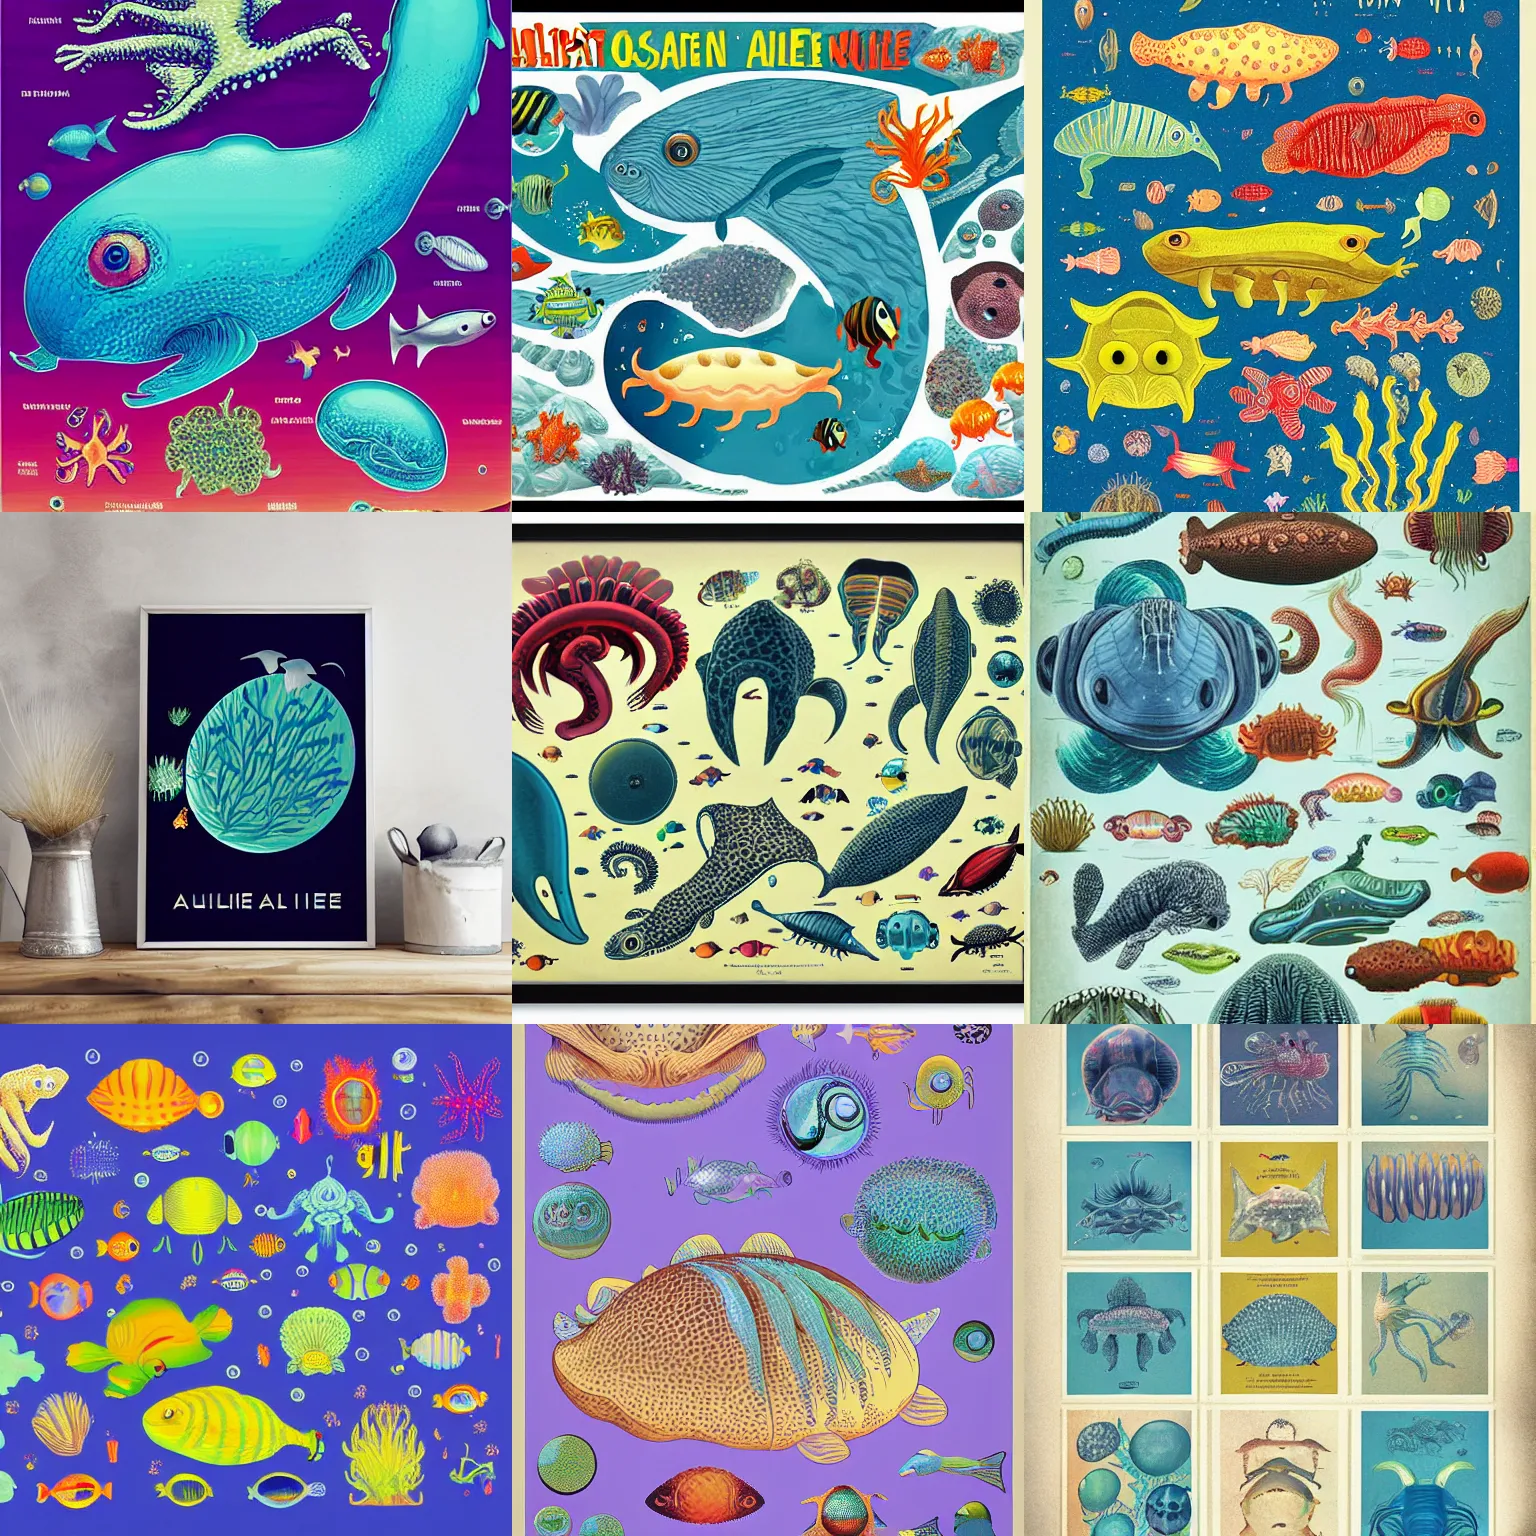 Prompt: poster with illustrations of alien aquatic life forms